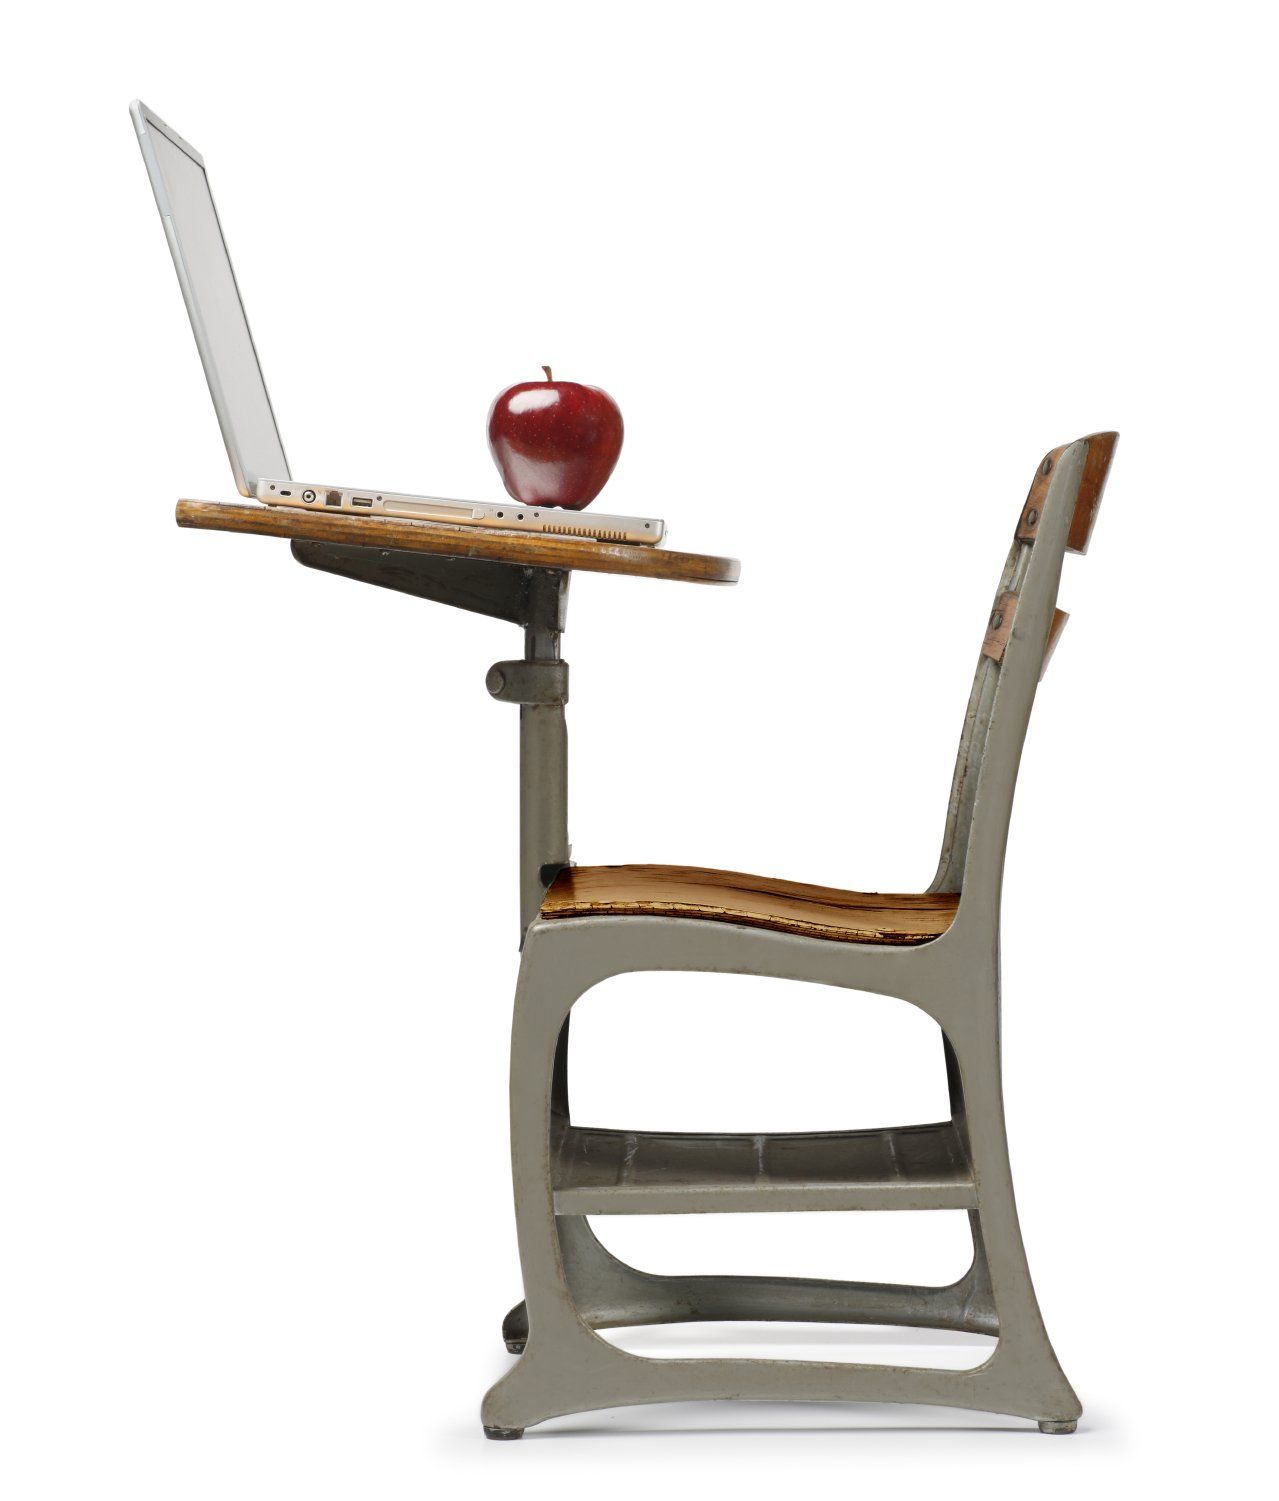 A nicely-designed metal desk and chair with a laptop and apple on the desk